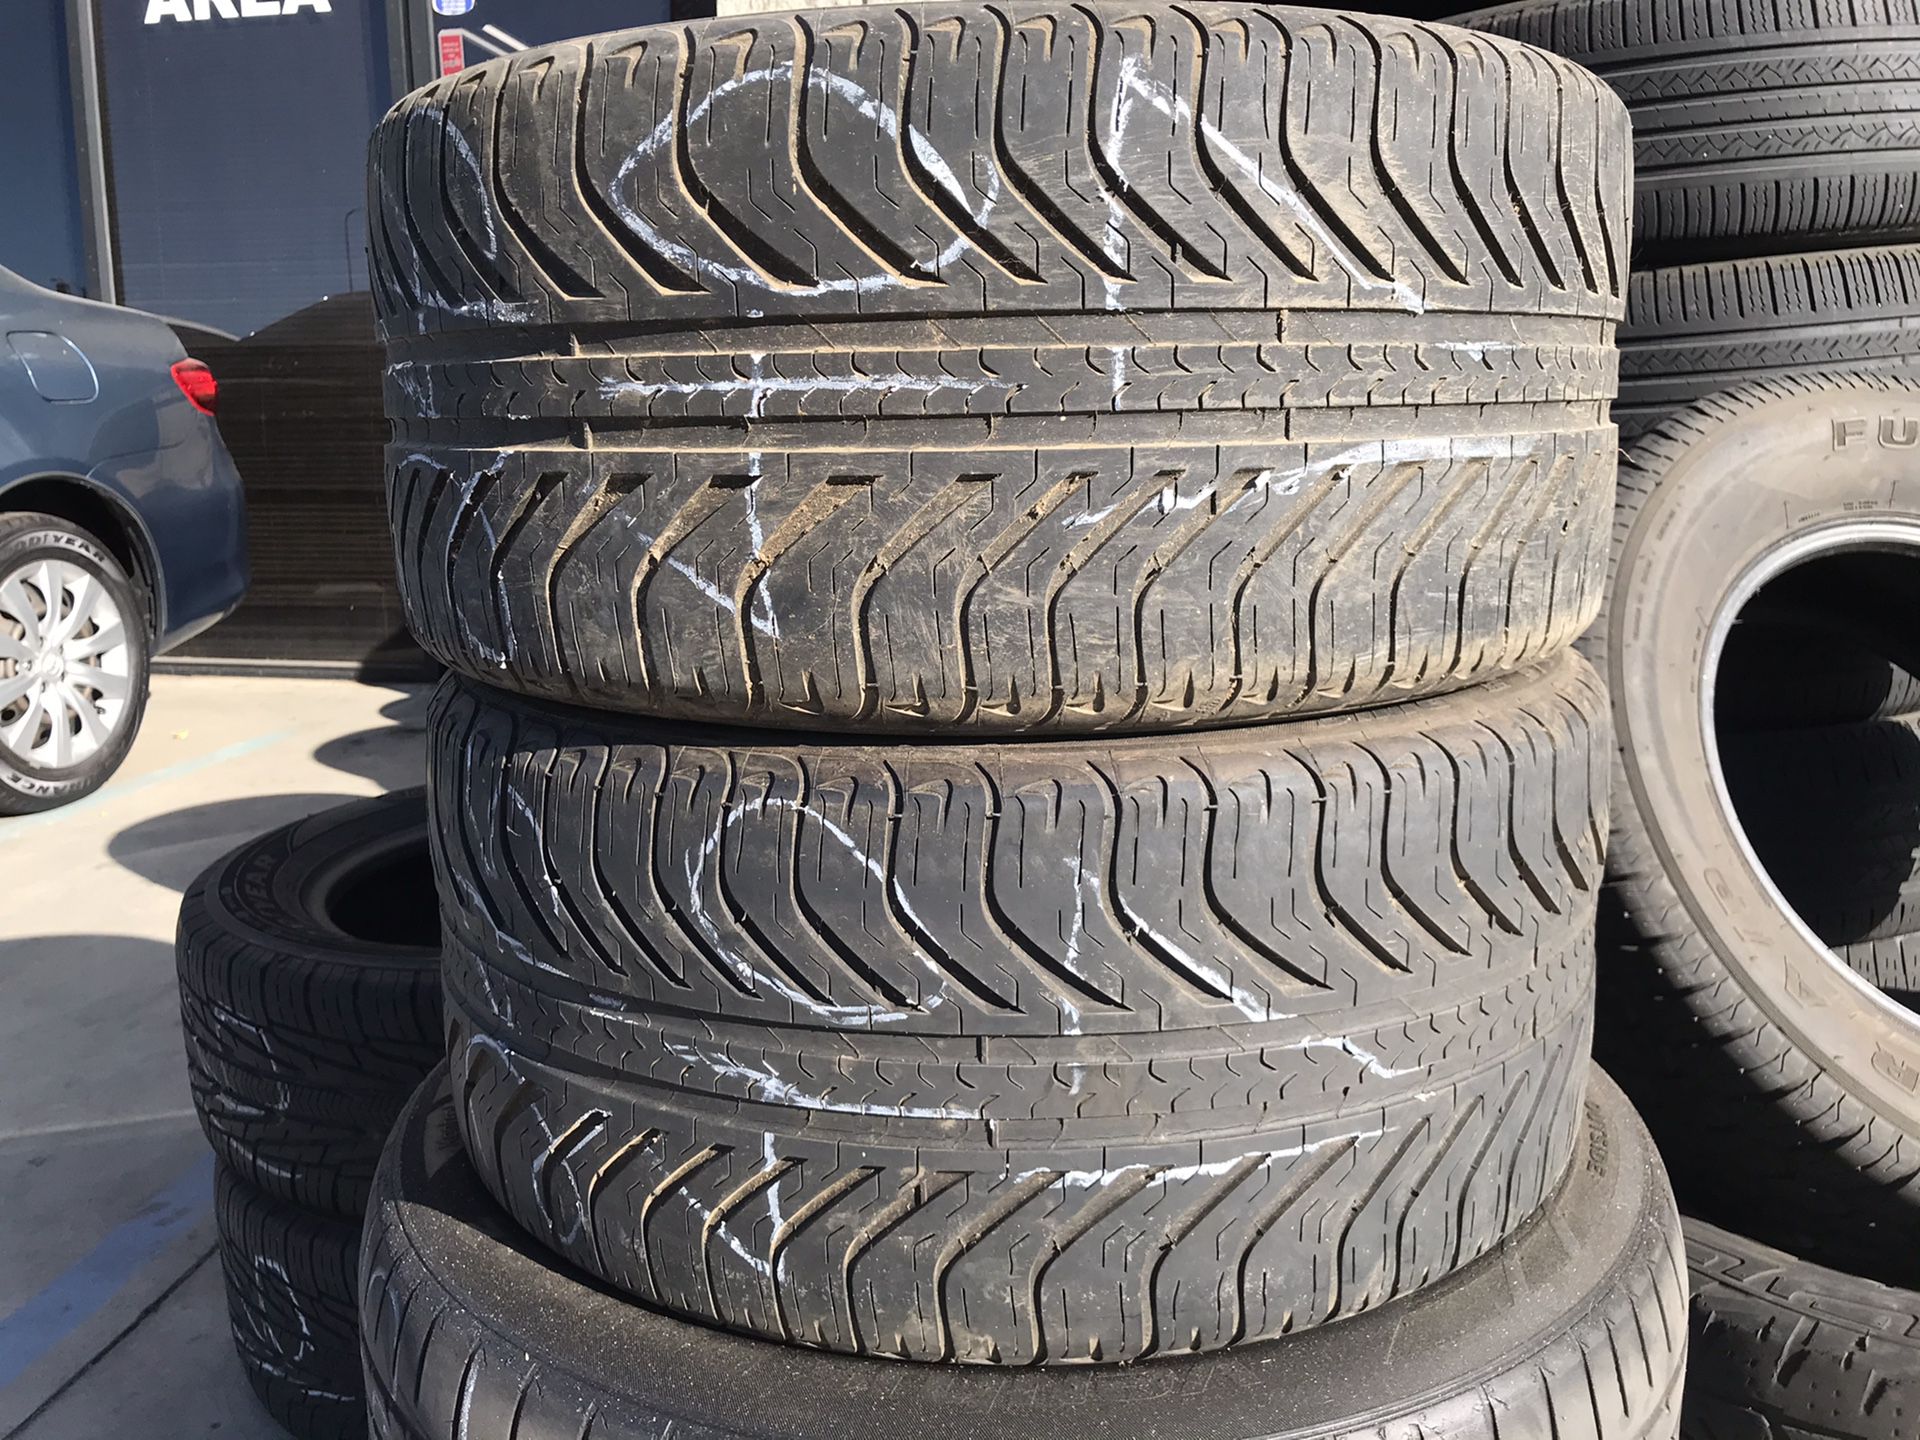 A Pair Of Used 245/40R17 245-40-17 Tire Tires